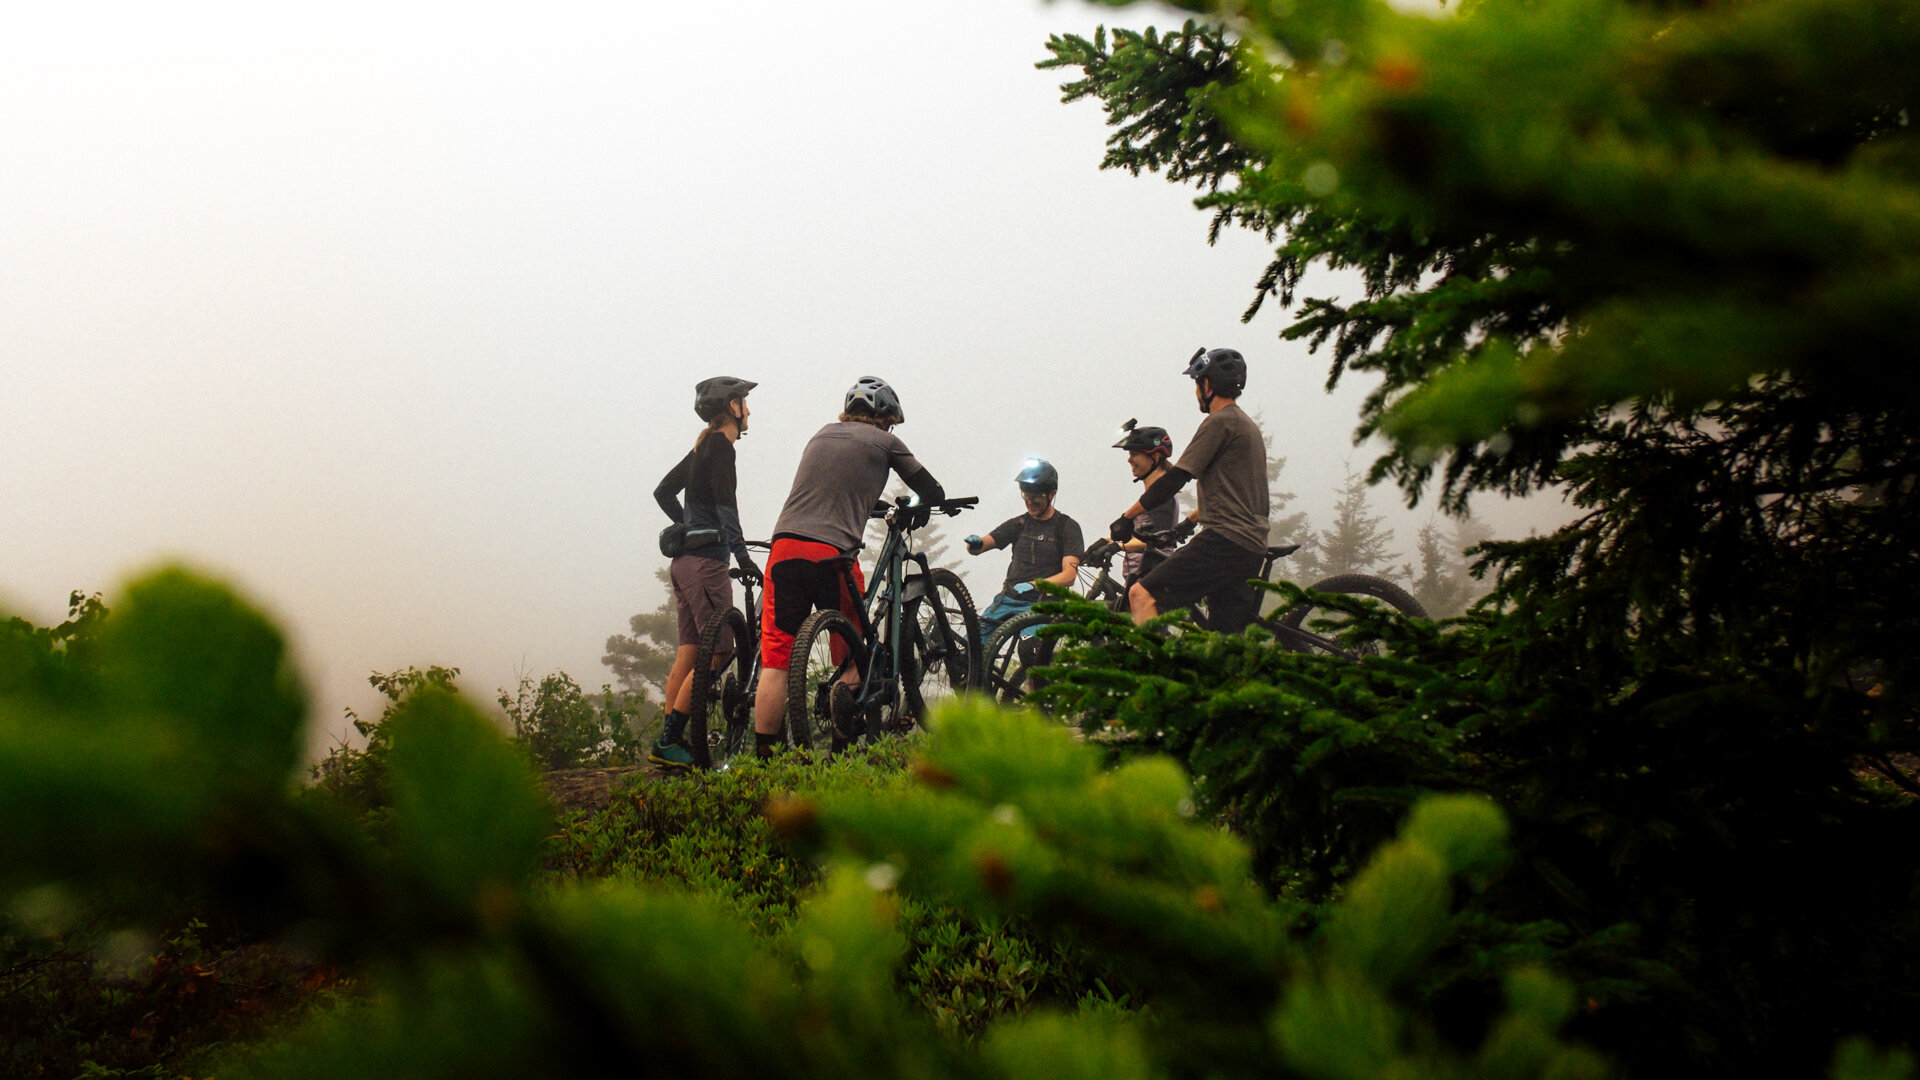 The team discussing the next trail to explore in Rockwood Park under a blanket of fog.